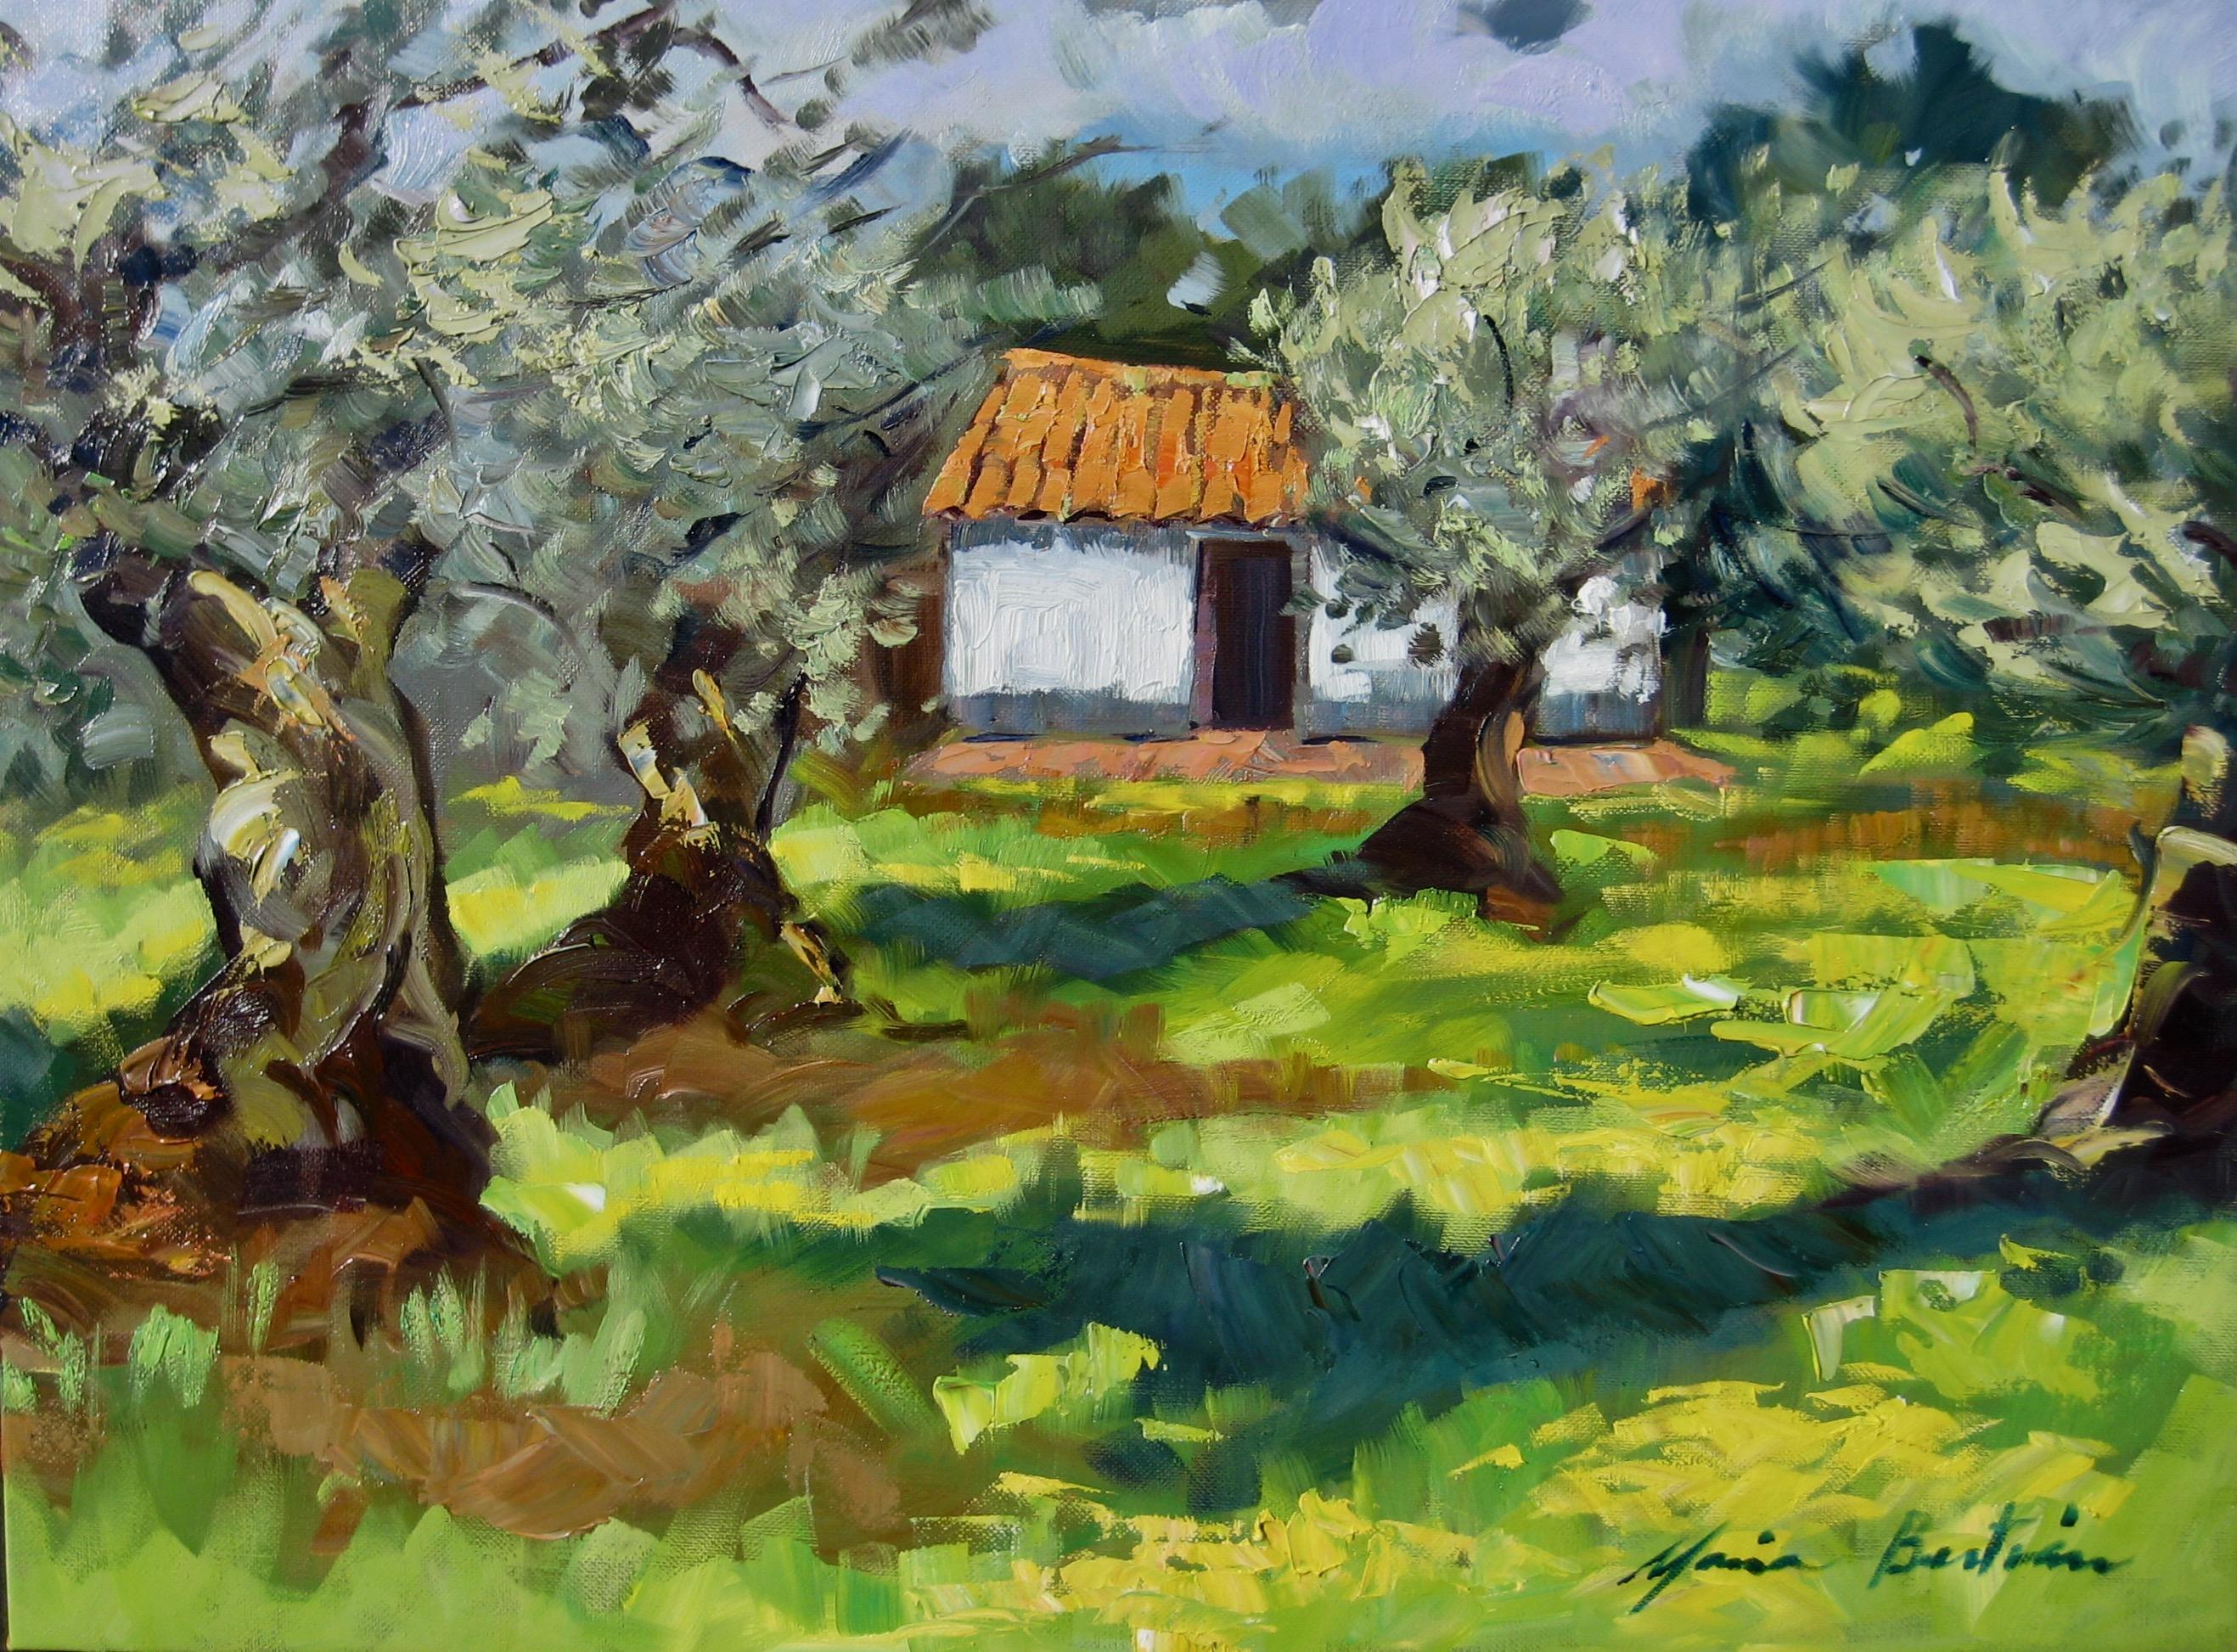 Maria Bertrán Landscape Painting - "White House In The Olive Grove"  Modern Impressionist Oil Painting of Spain